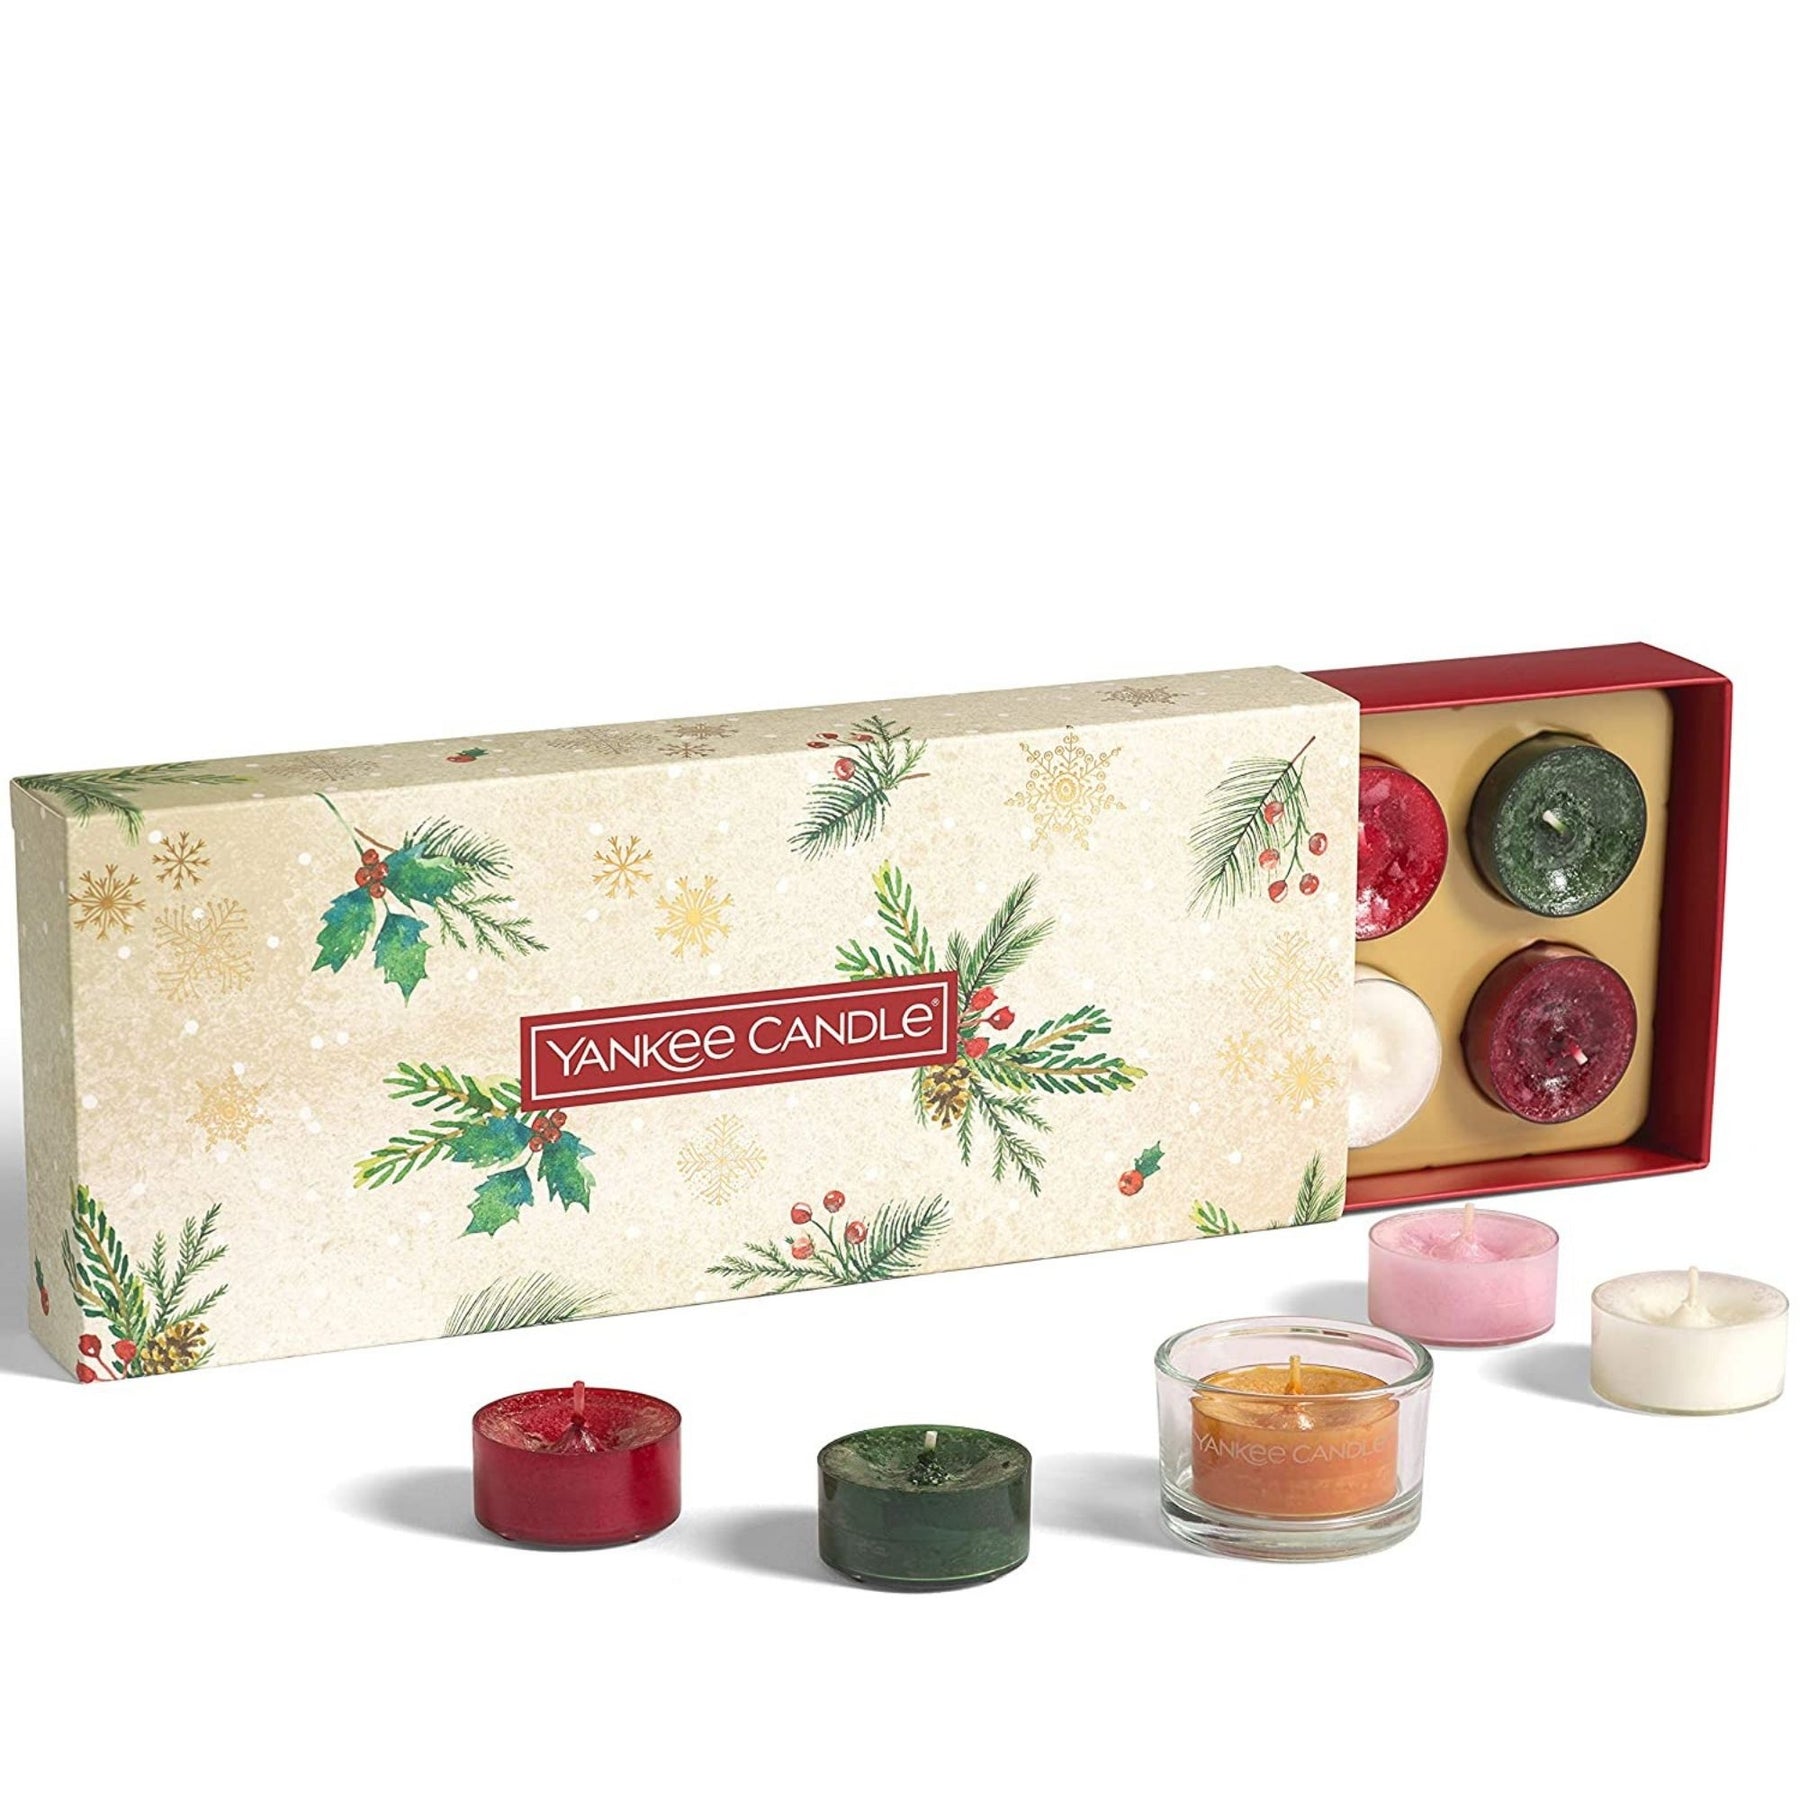 Yankee Candle Christmas Morning Tealight Gift Set – The Spotty Bag Shop